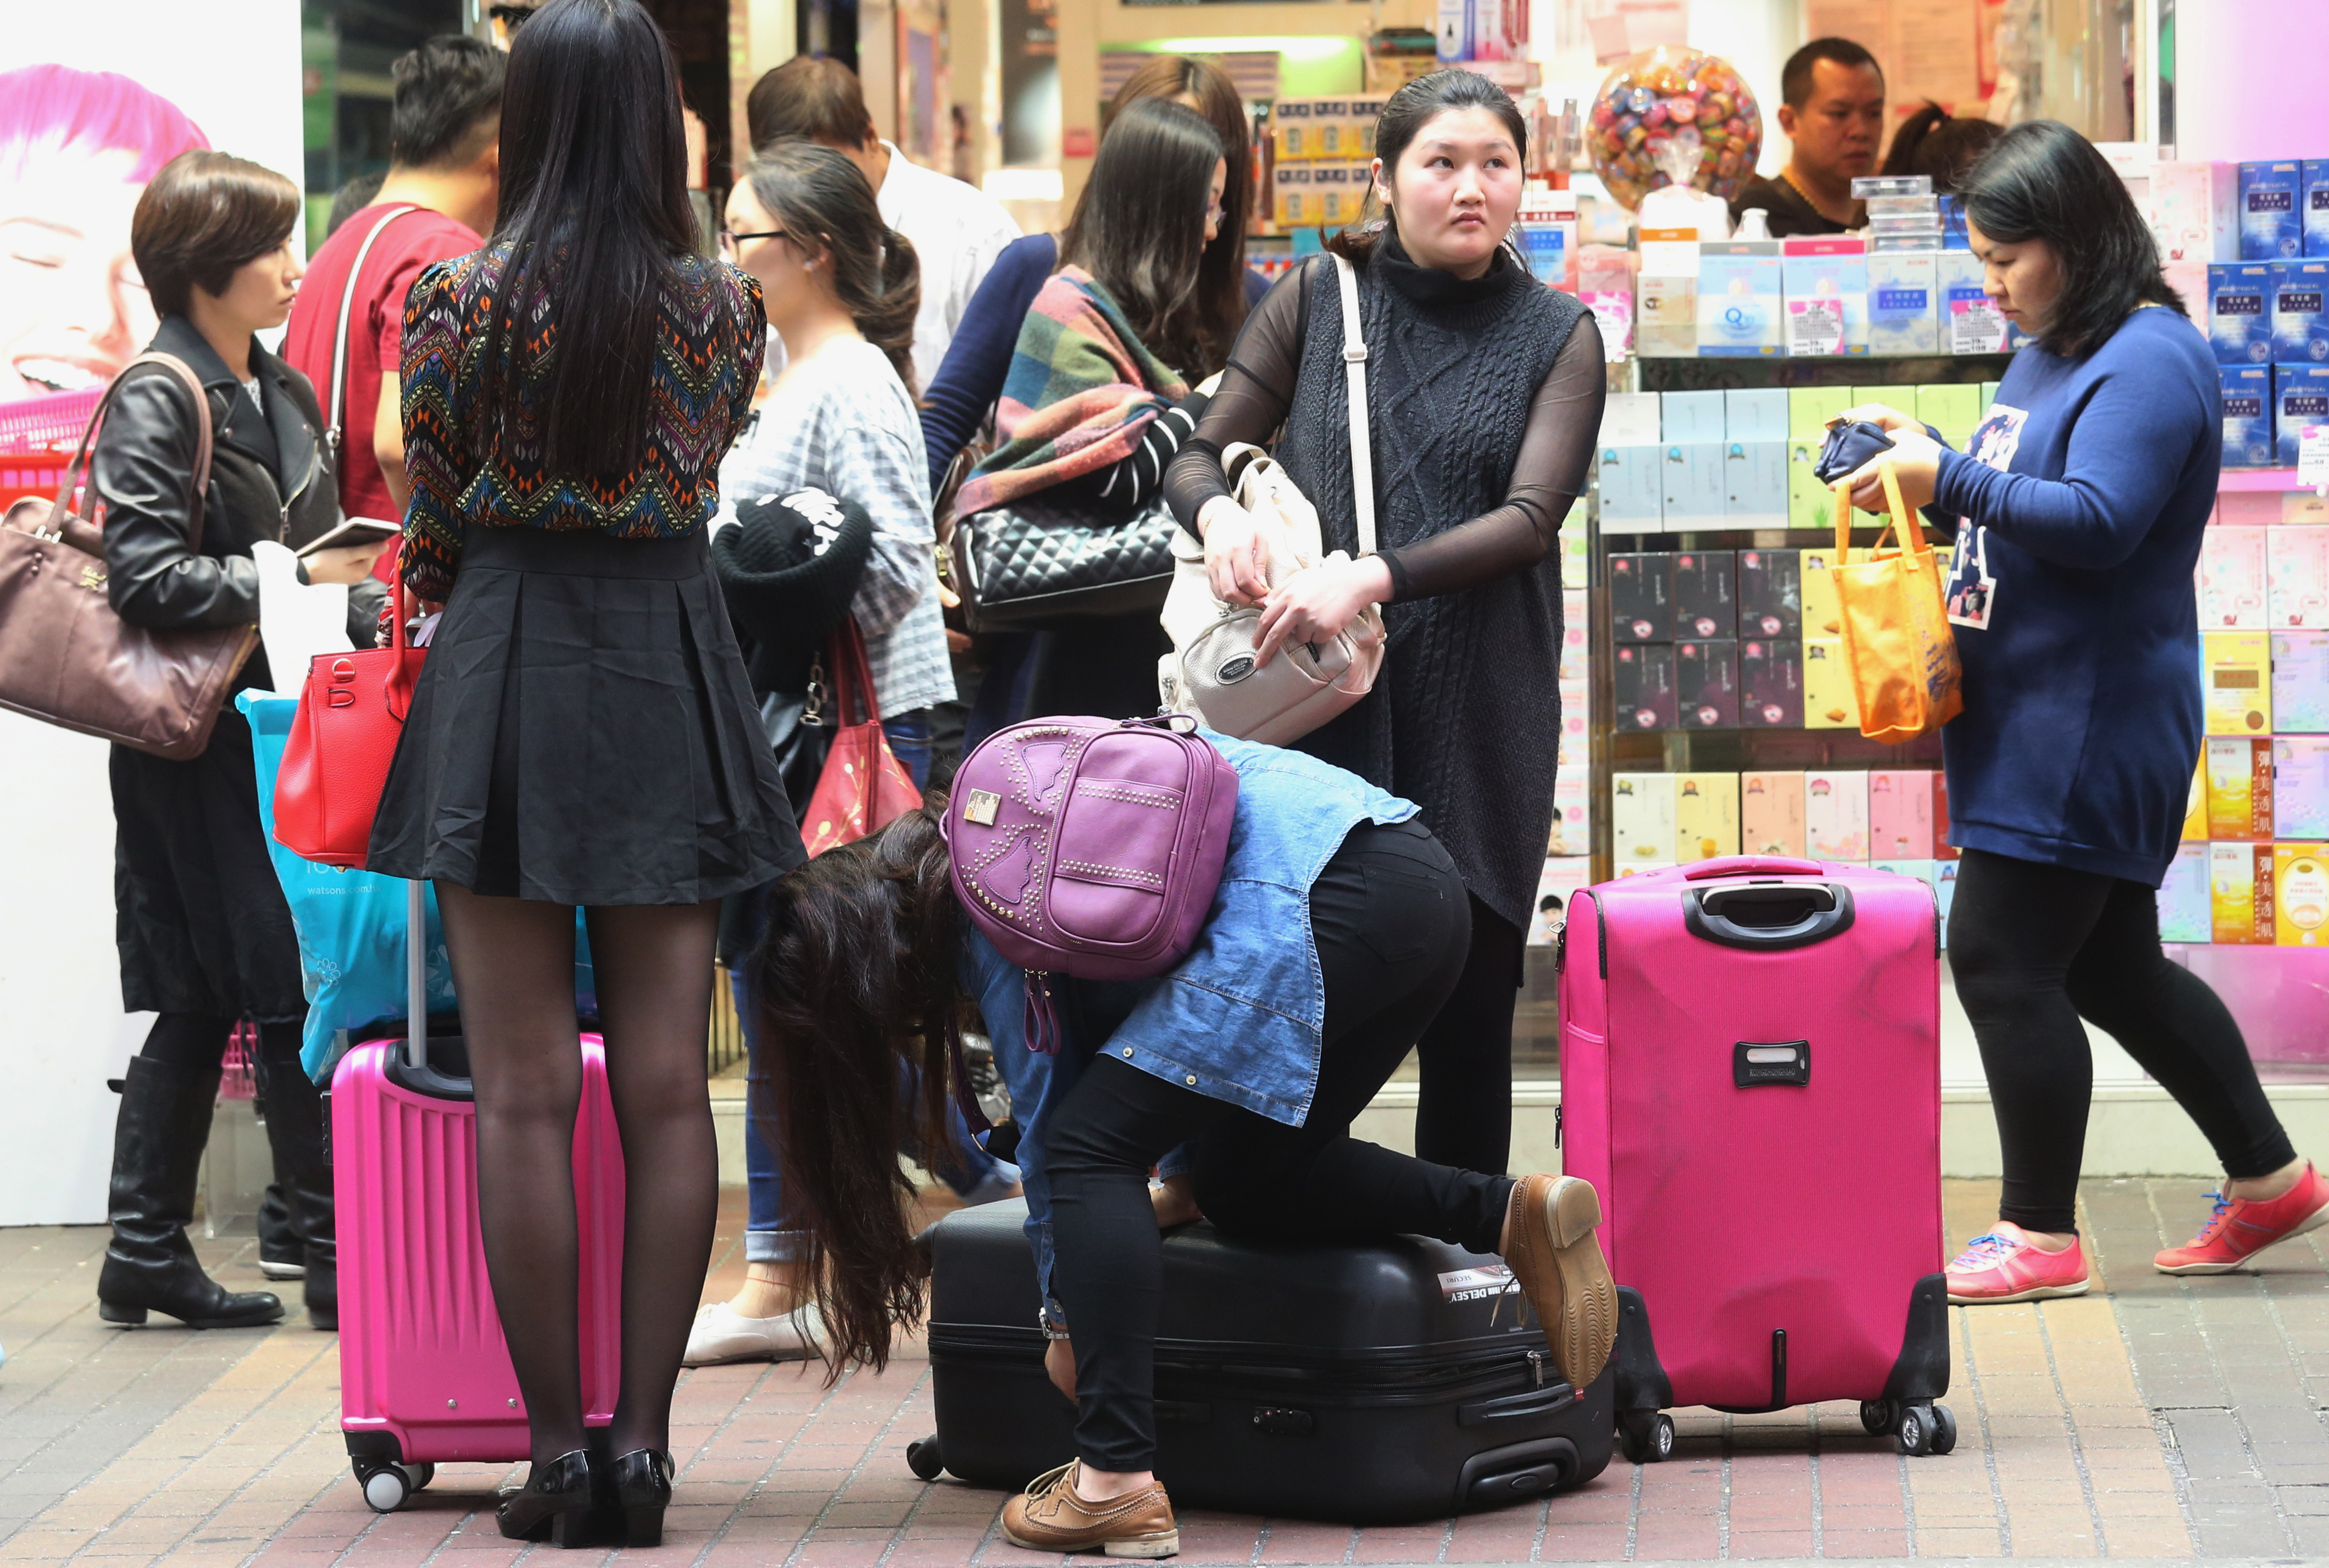 The sheer influx of mainland visitors in the city raises fears among some that Hong Kong may lose its identity. Photo: David Wong